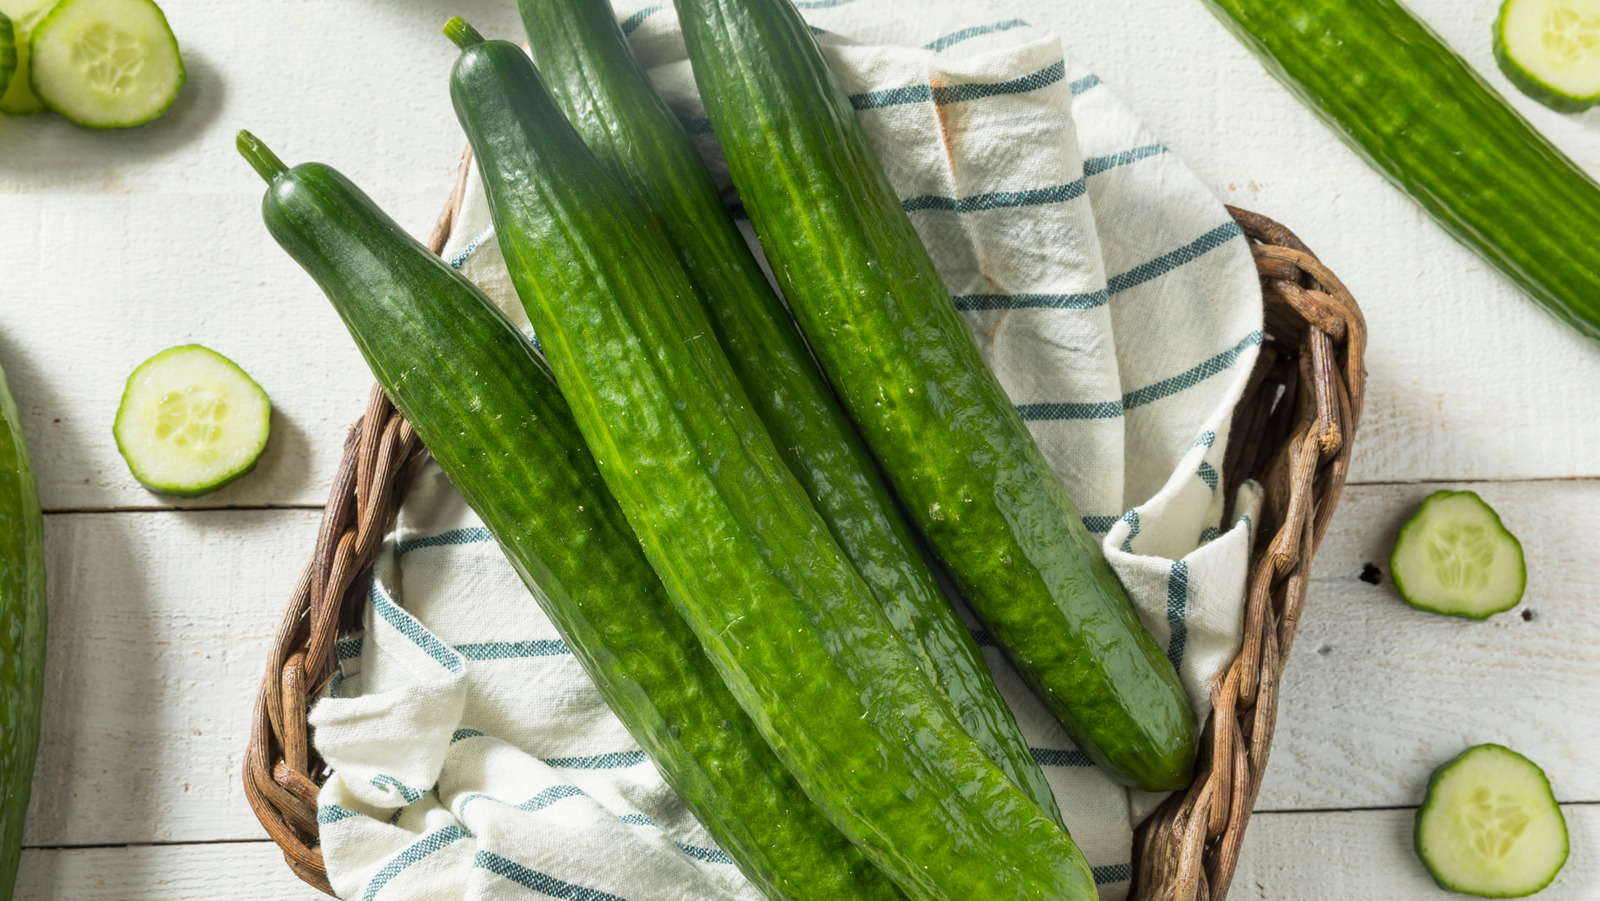 what-are-english-cucumbers-and-why-are-they-sometimes-wrapped-in-plastic